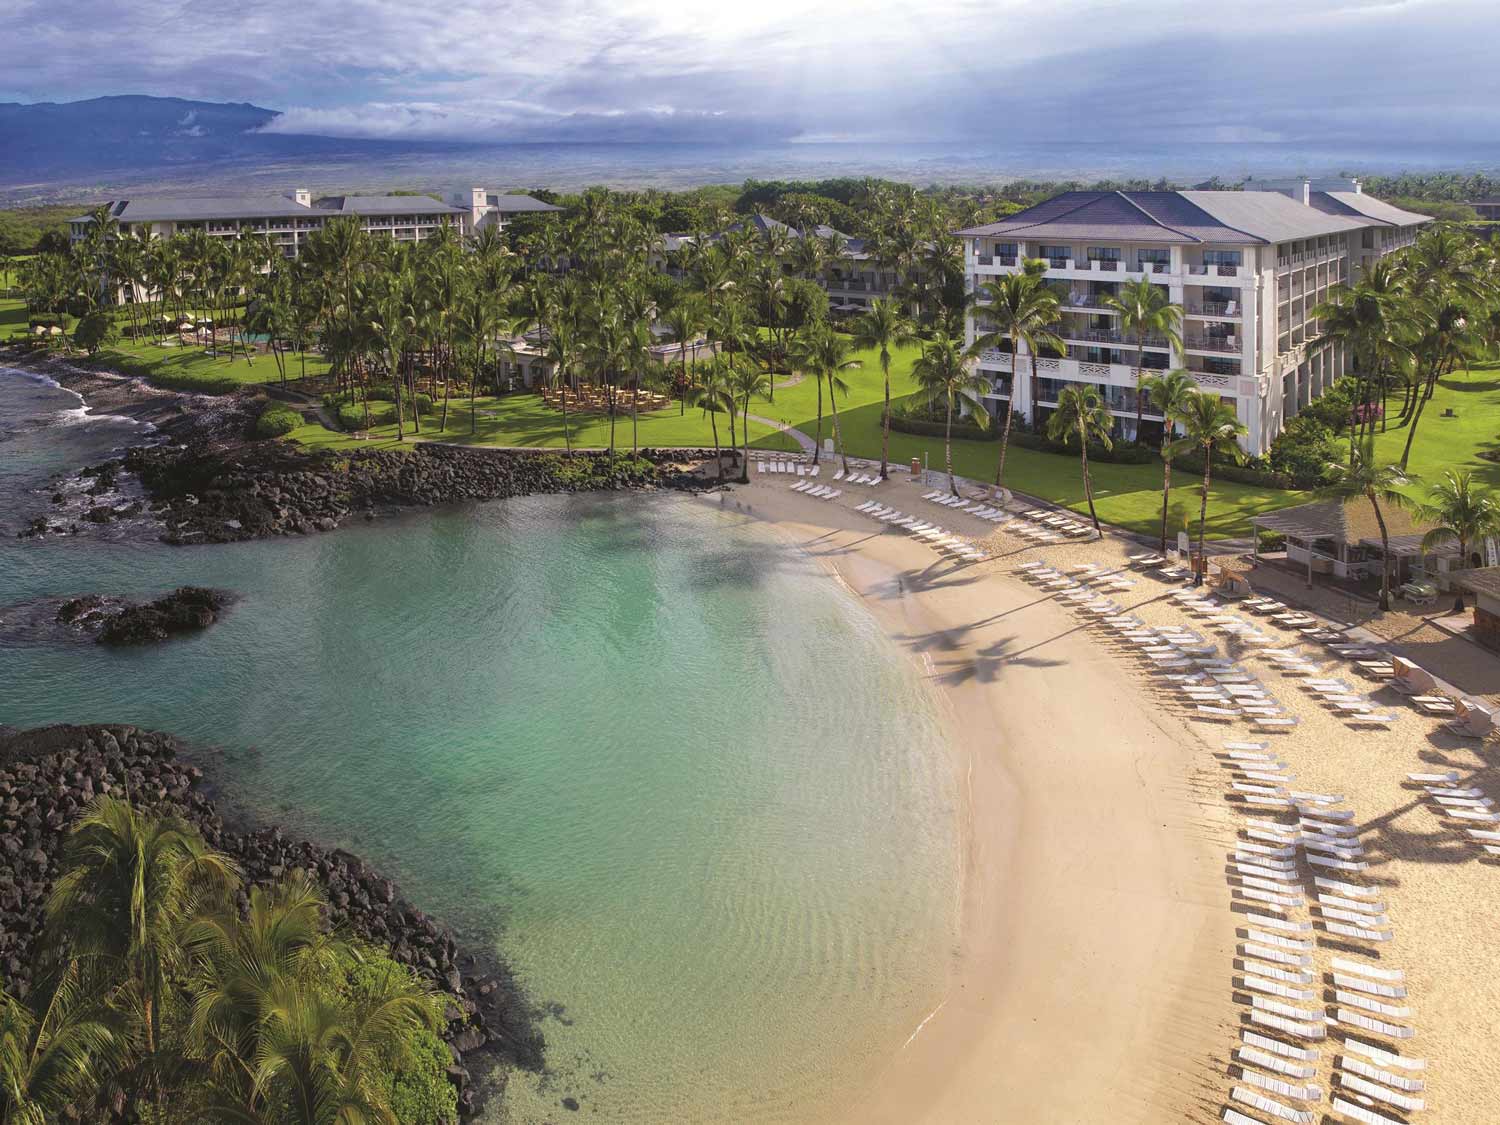 The beach at Fairmont Orchid is studded with black-lava outcroppings